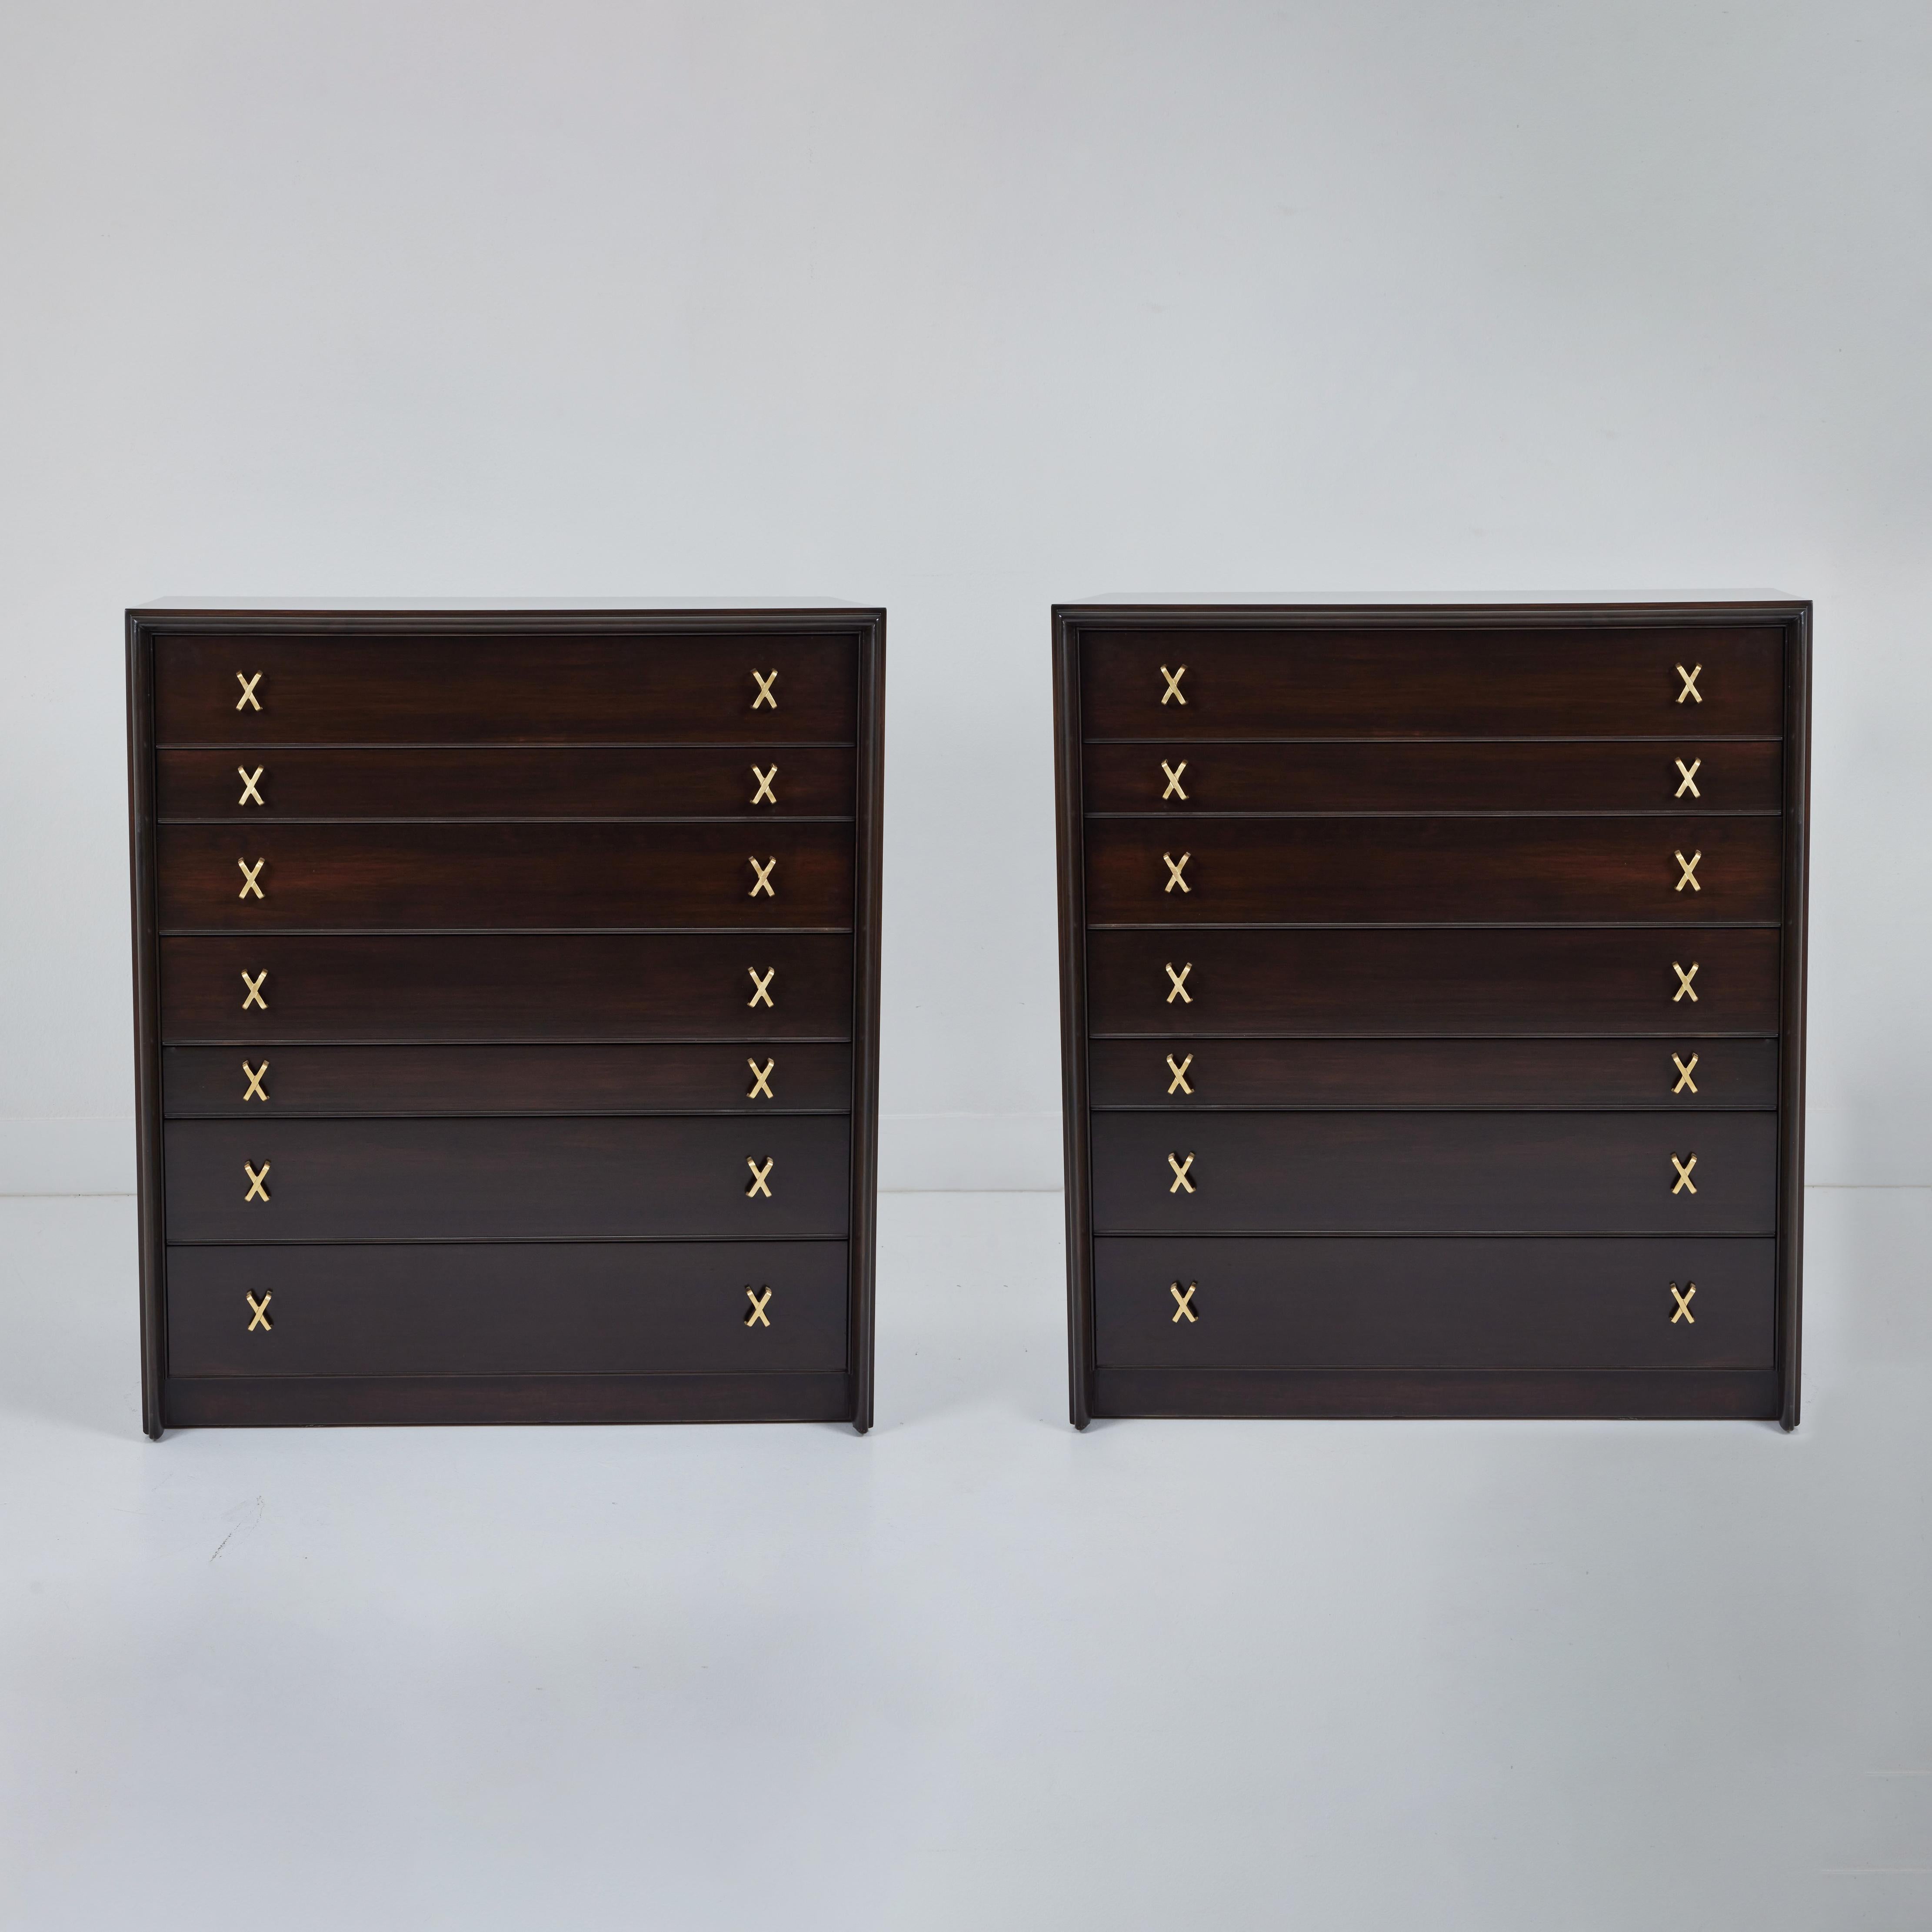 This pair of high chests  designed by Paul Frankl for Johnson Furniture were produced in the 1950s. Standing the test of time, the craftsmanship of these is unmistakable. The chests have been restored sporting a dark stain, allowing for subtle hints